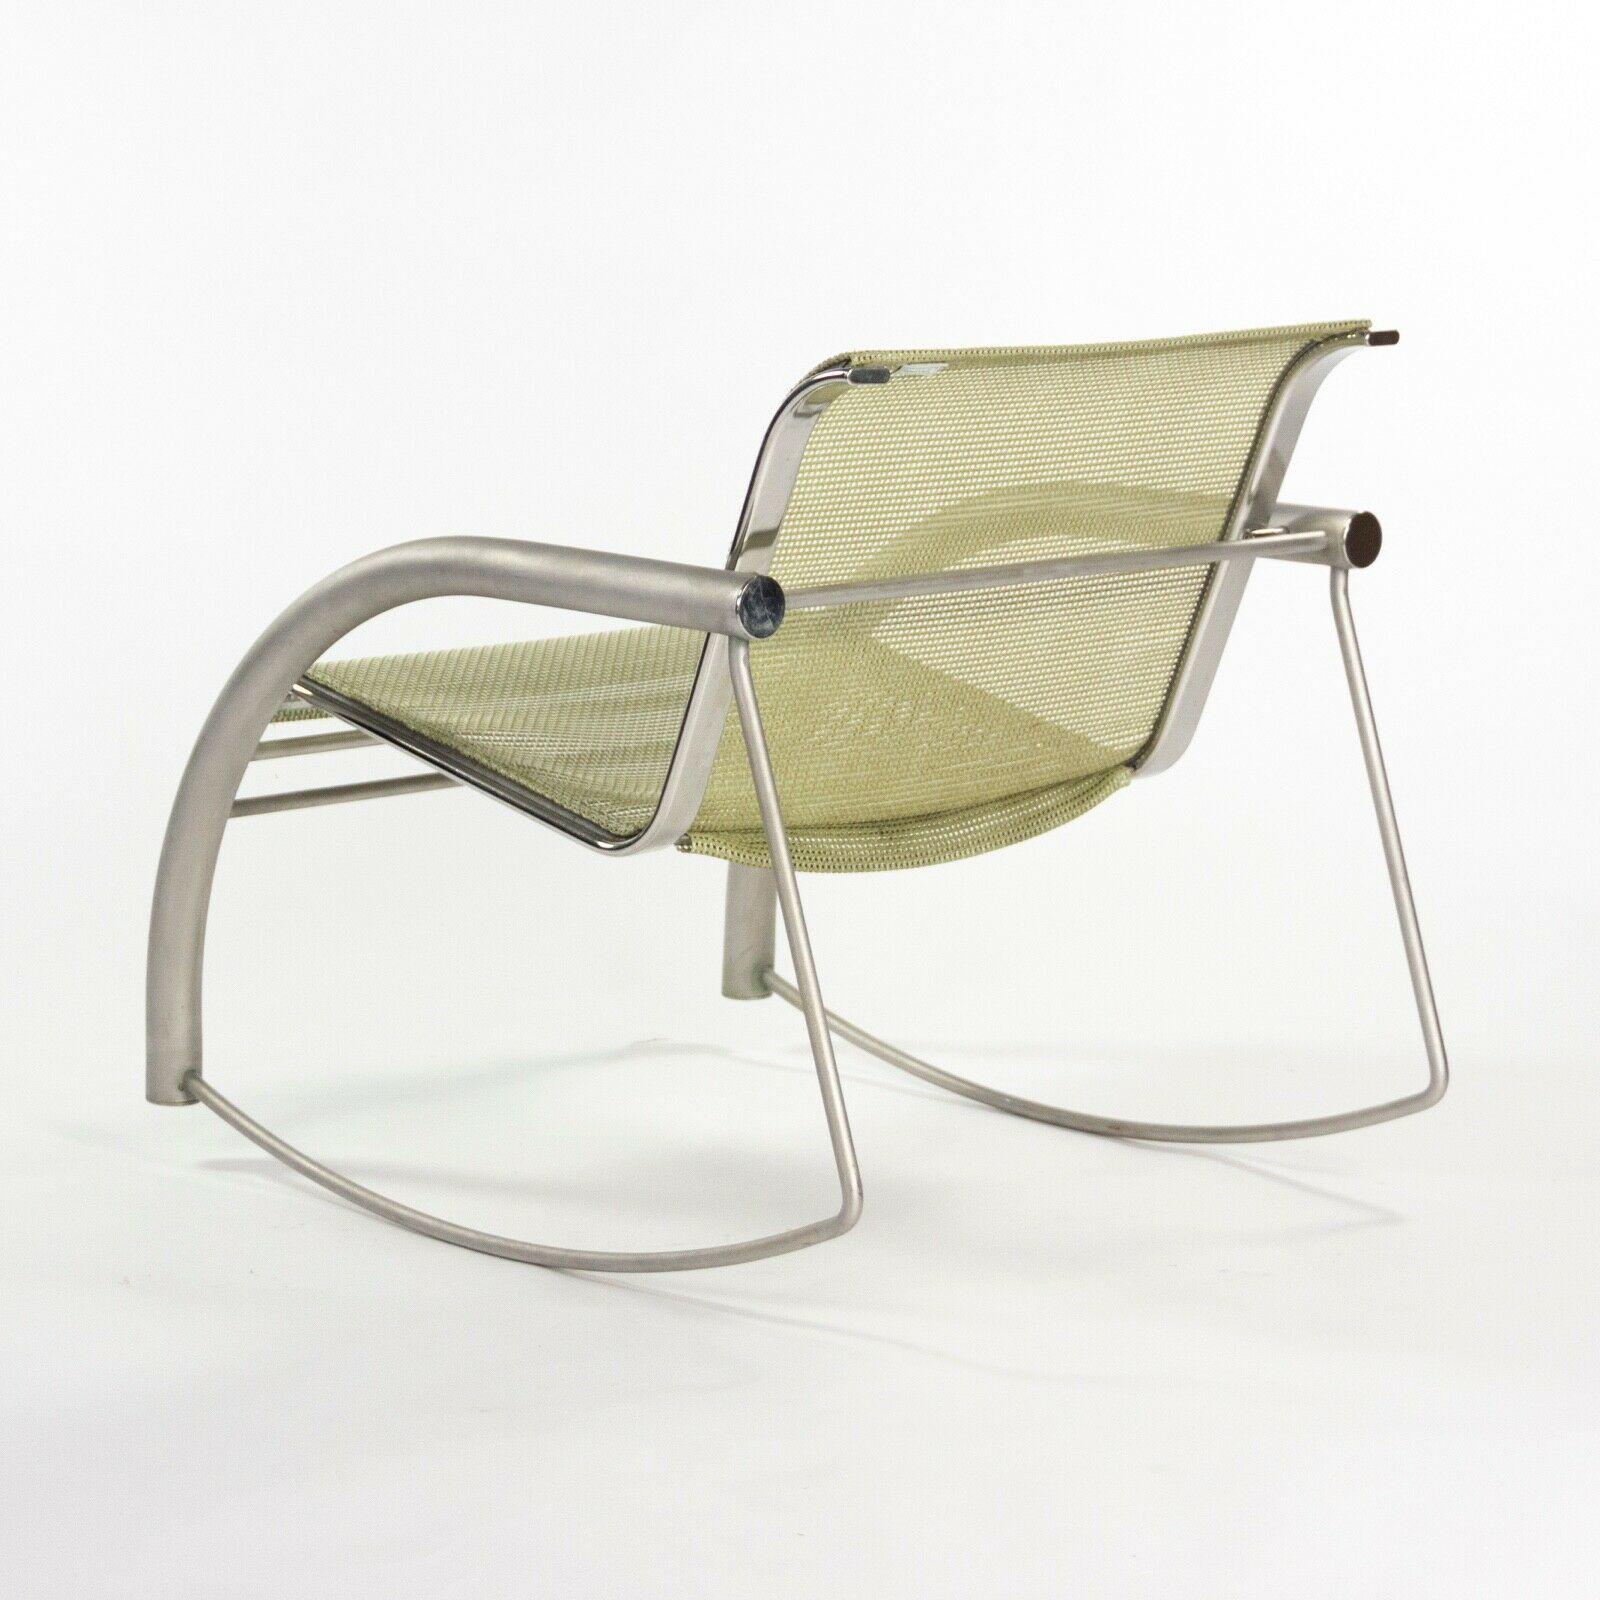 Prototype Richard Schultz 2002 Collection Stainless Steel & Mesh Rocking Chair For Sale 1